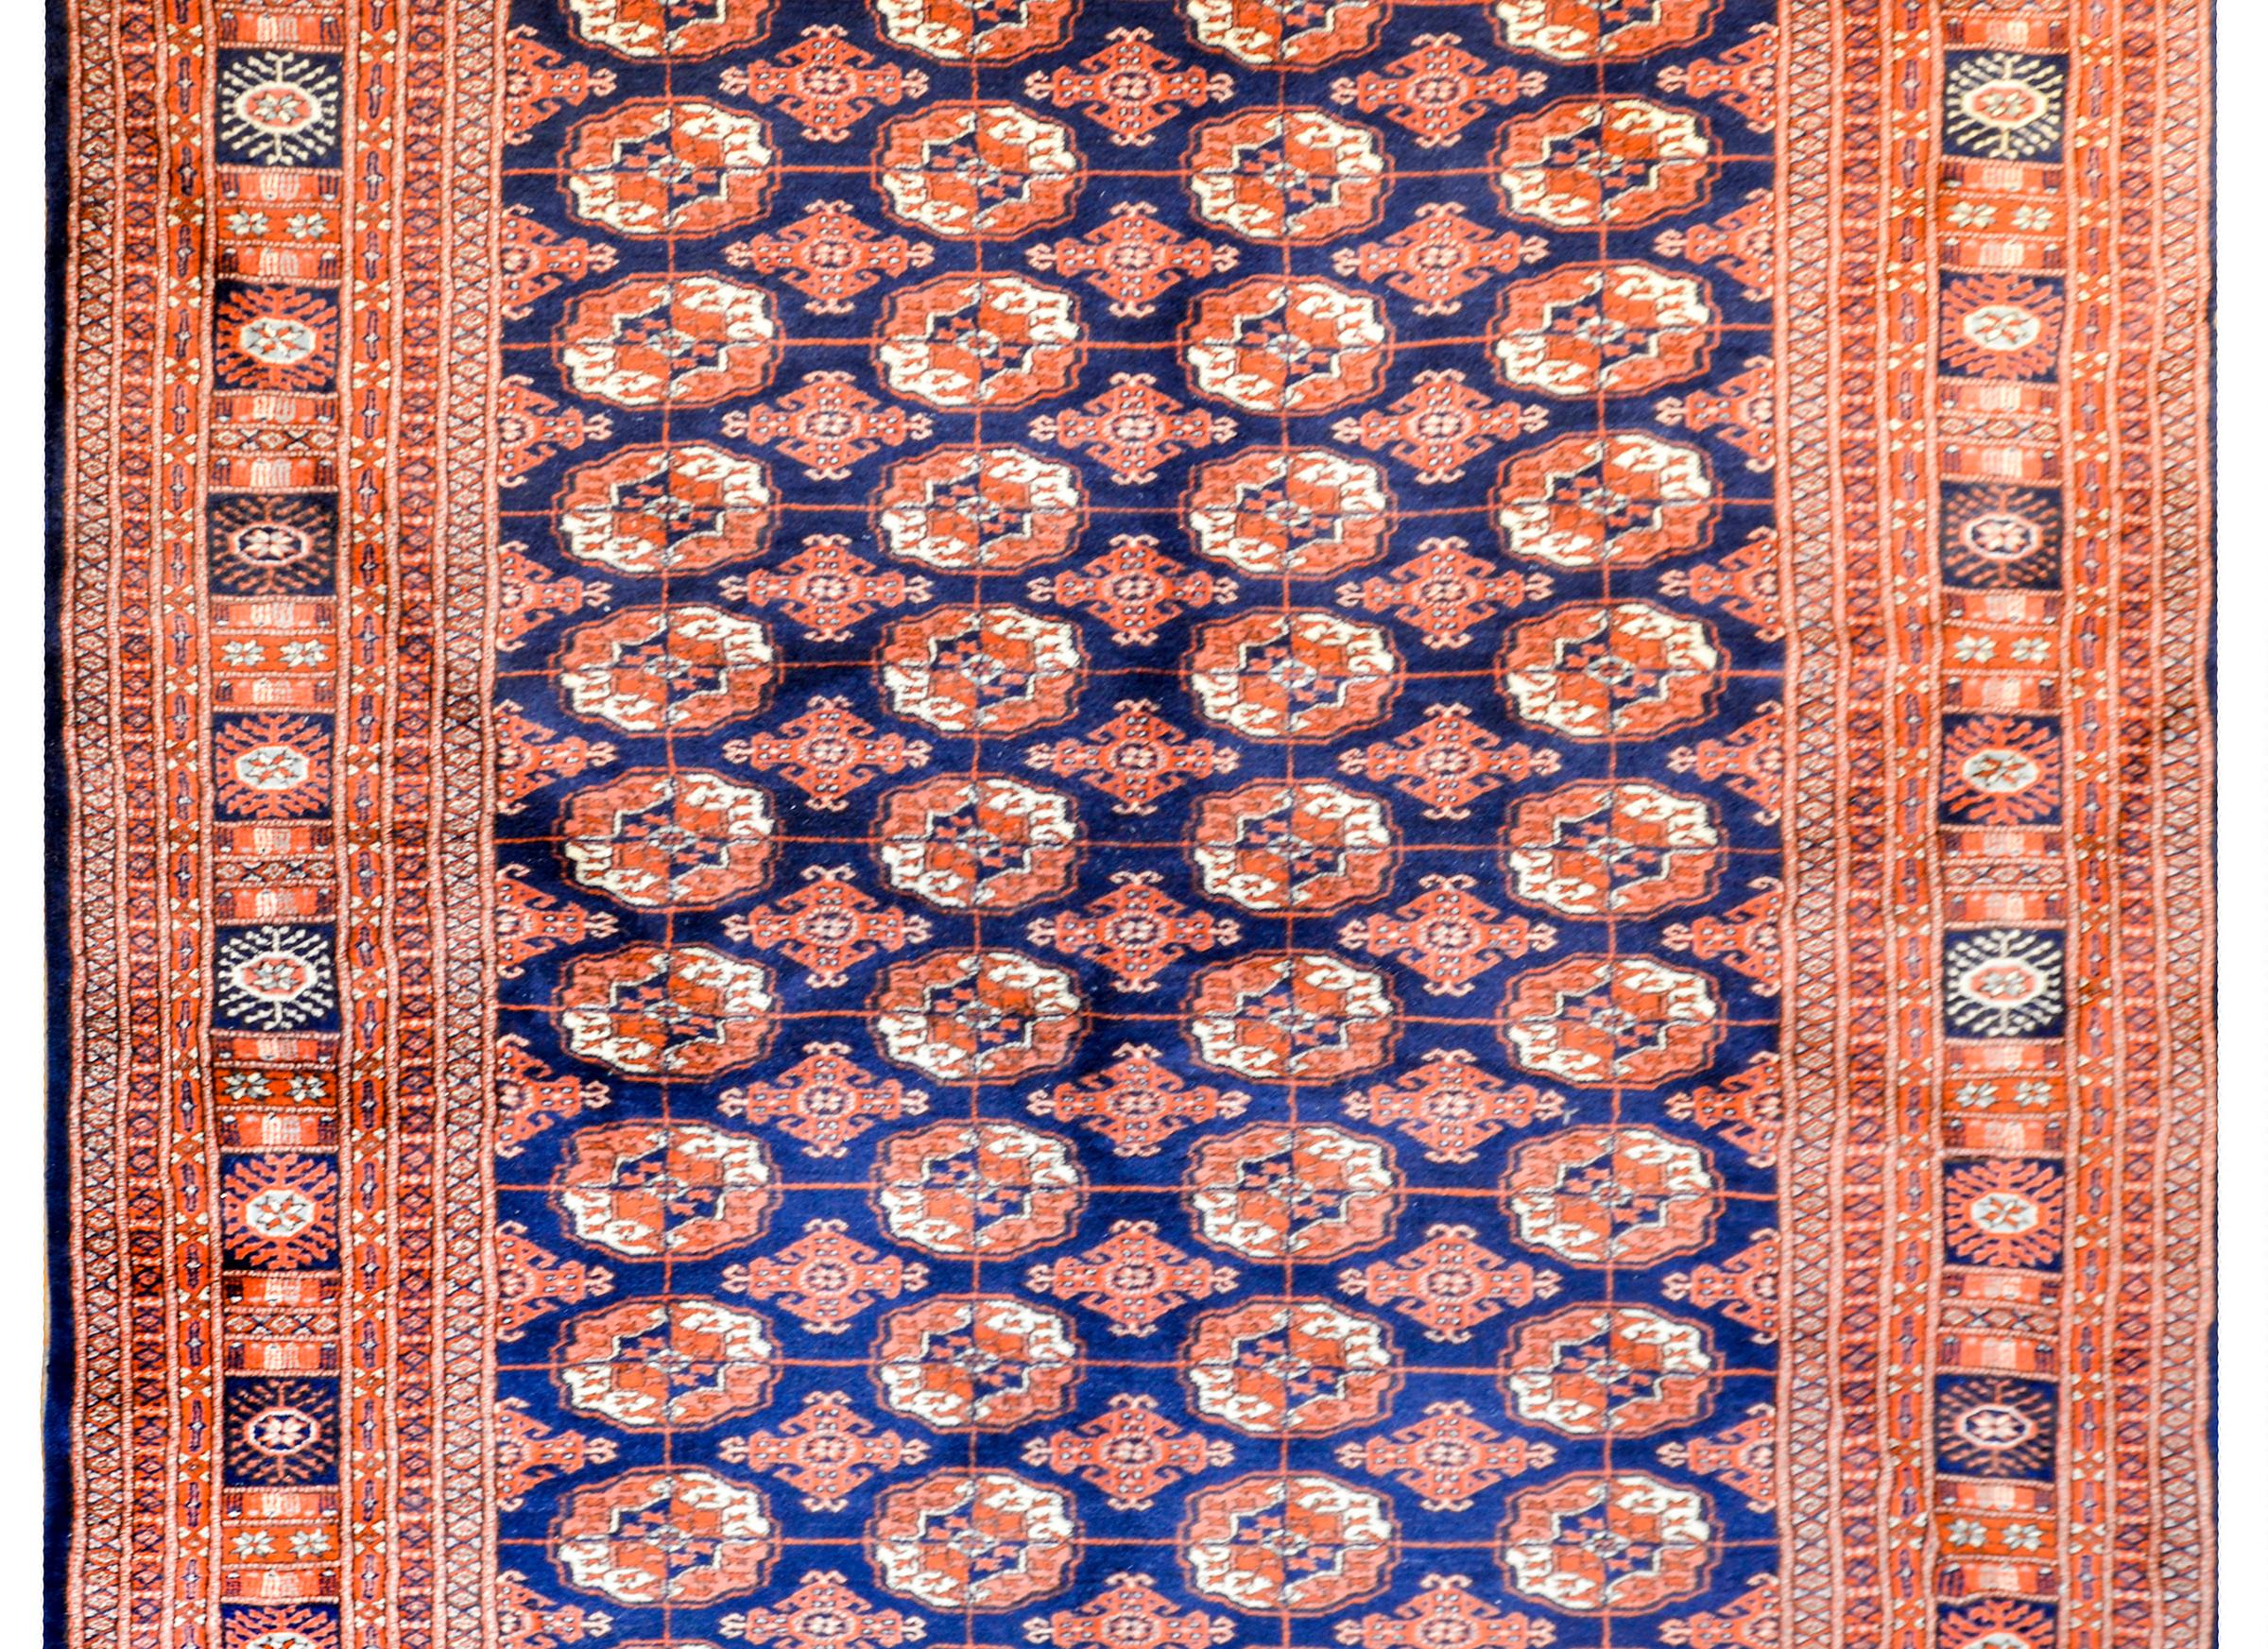 An exceptional vintage Afghani Bokhara rug with an all-over stylized floral medallion pattern woven in white, indigo, and orange vegetable dyed wool, on a dark indigo ground. The border is extra wide, comprised of multiple petite and wide stylized